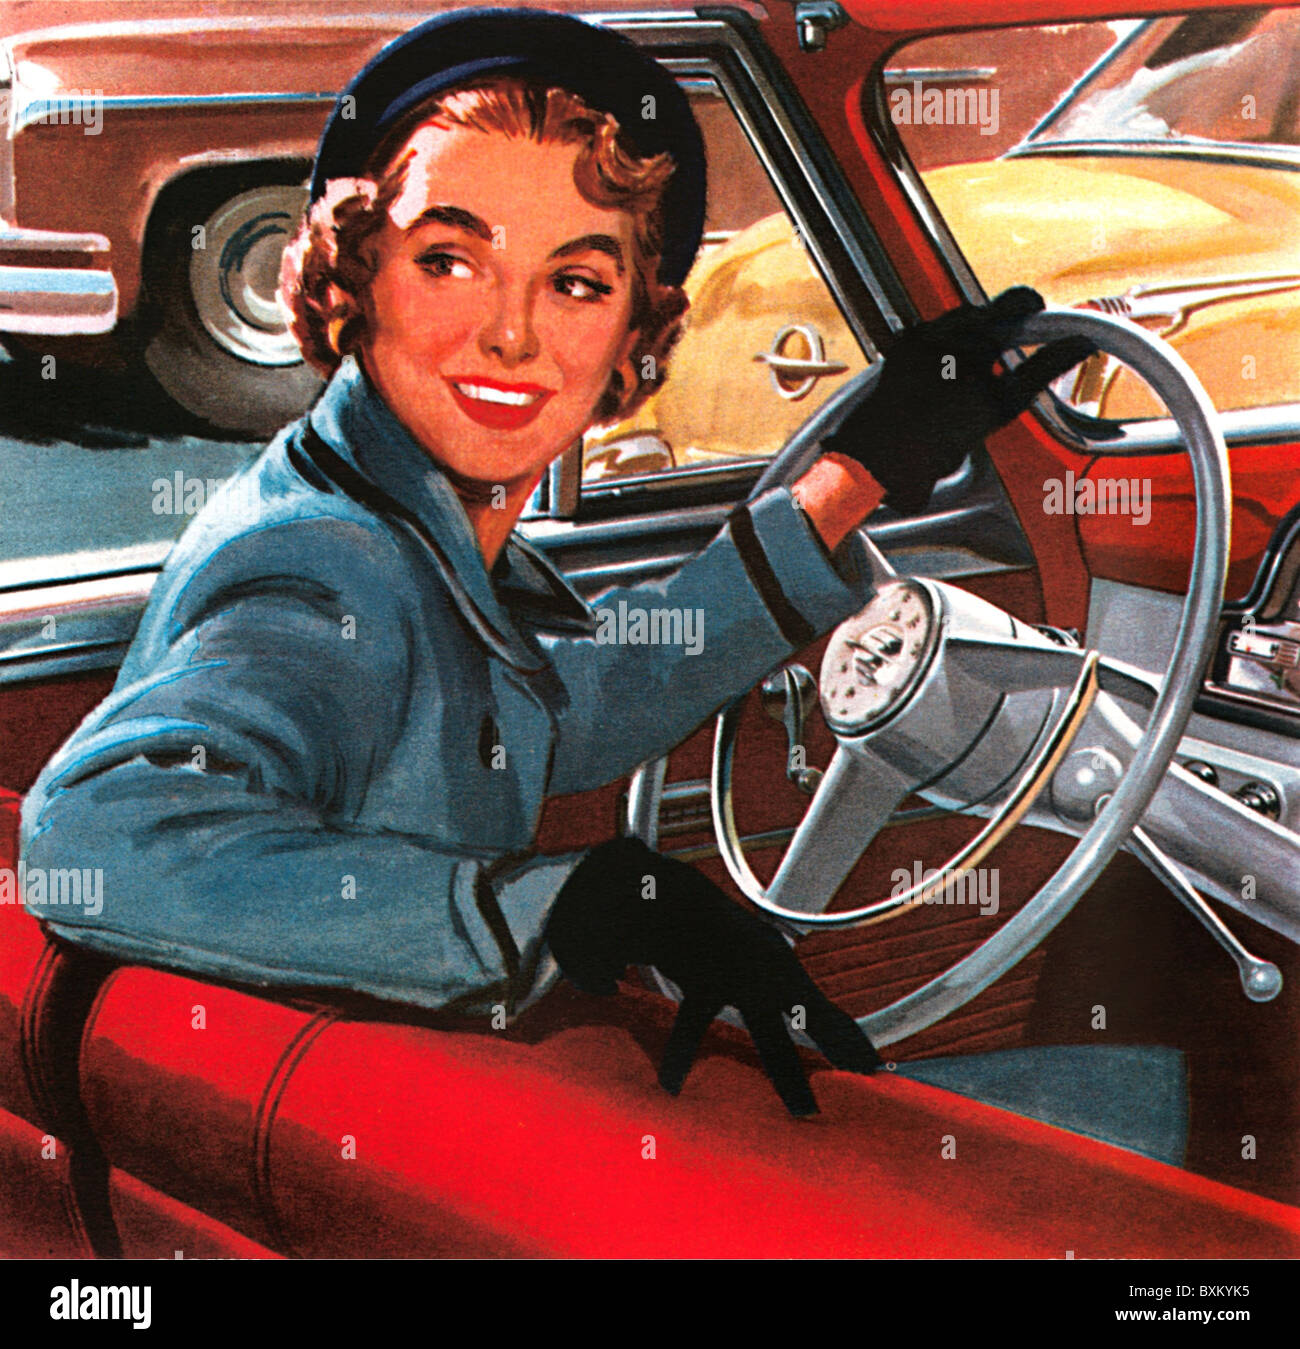 transport / transportation, car, drivers, female driver, Canada, 1952, Additional-Rights-Clearences-Not Available Stock Photo